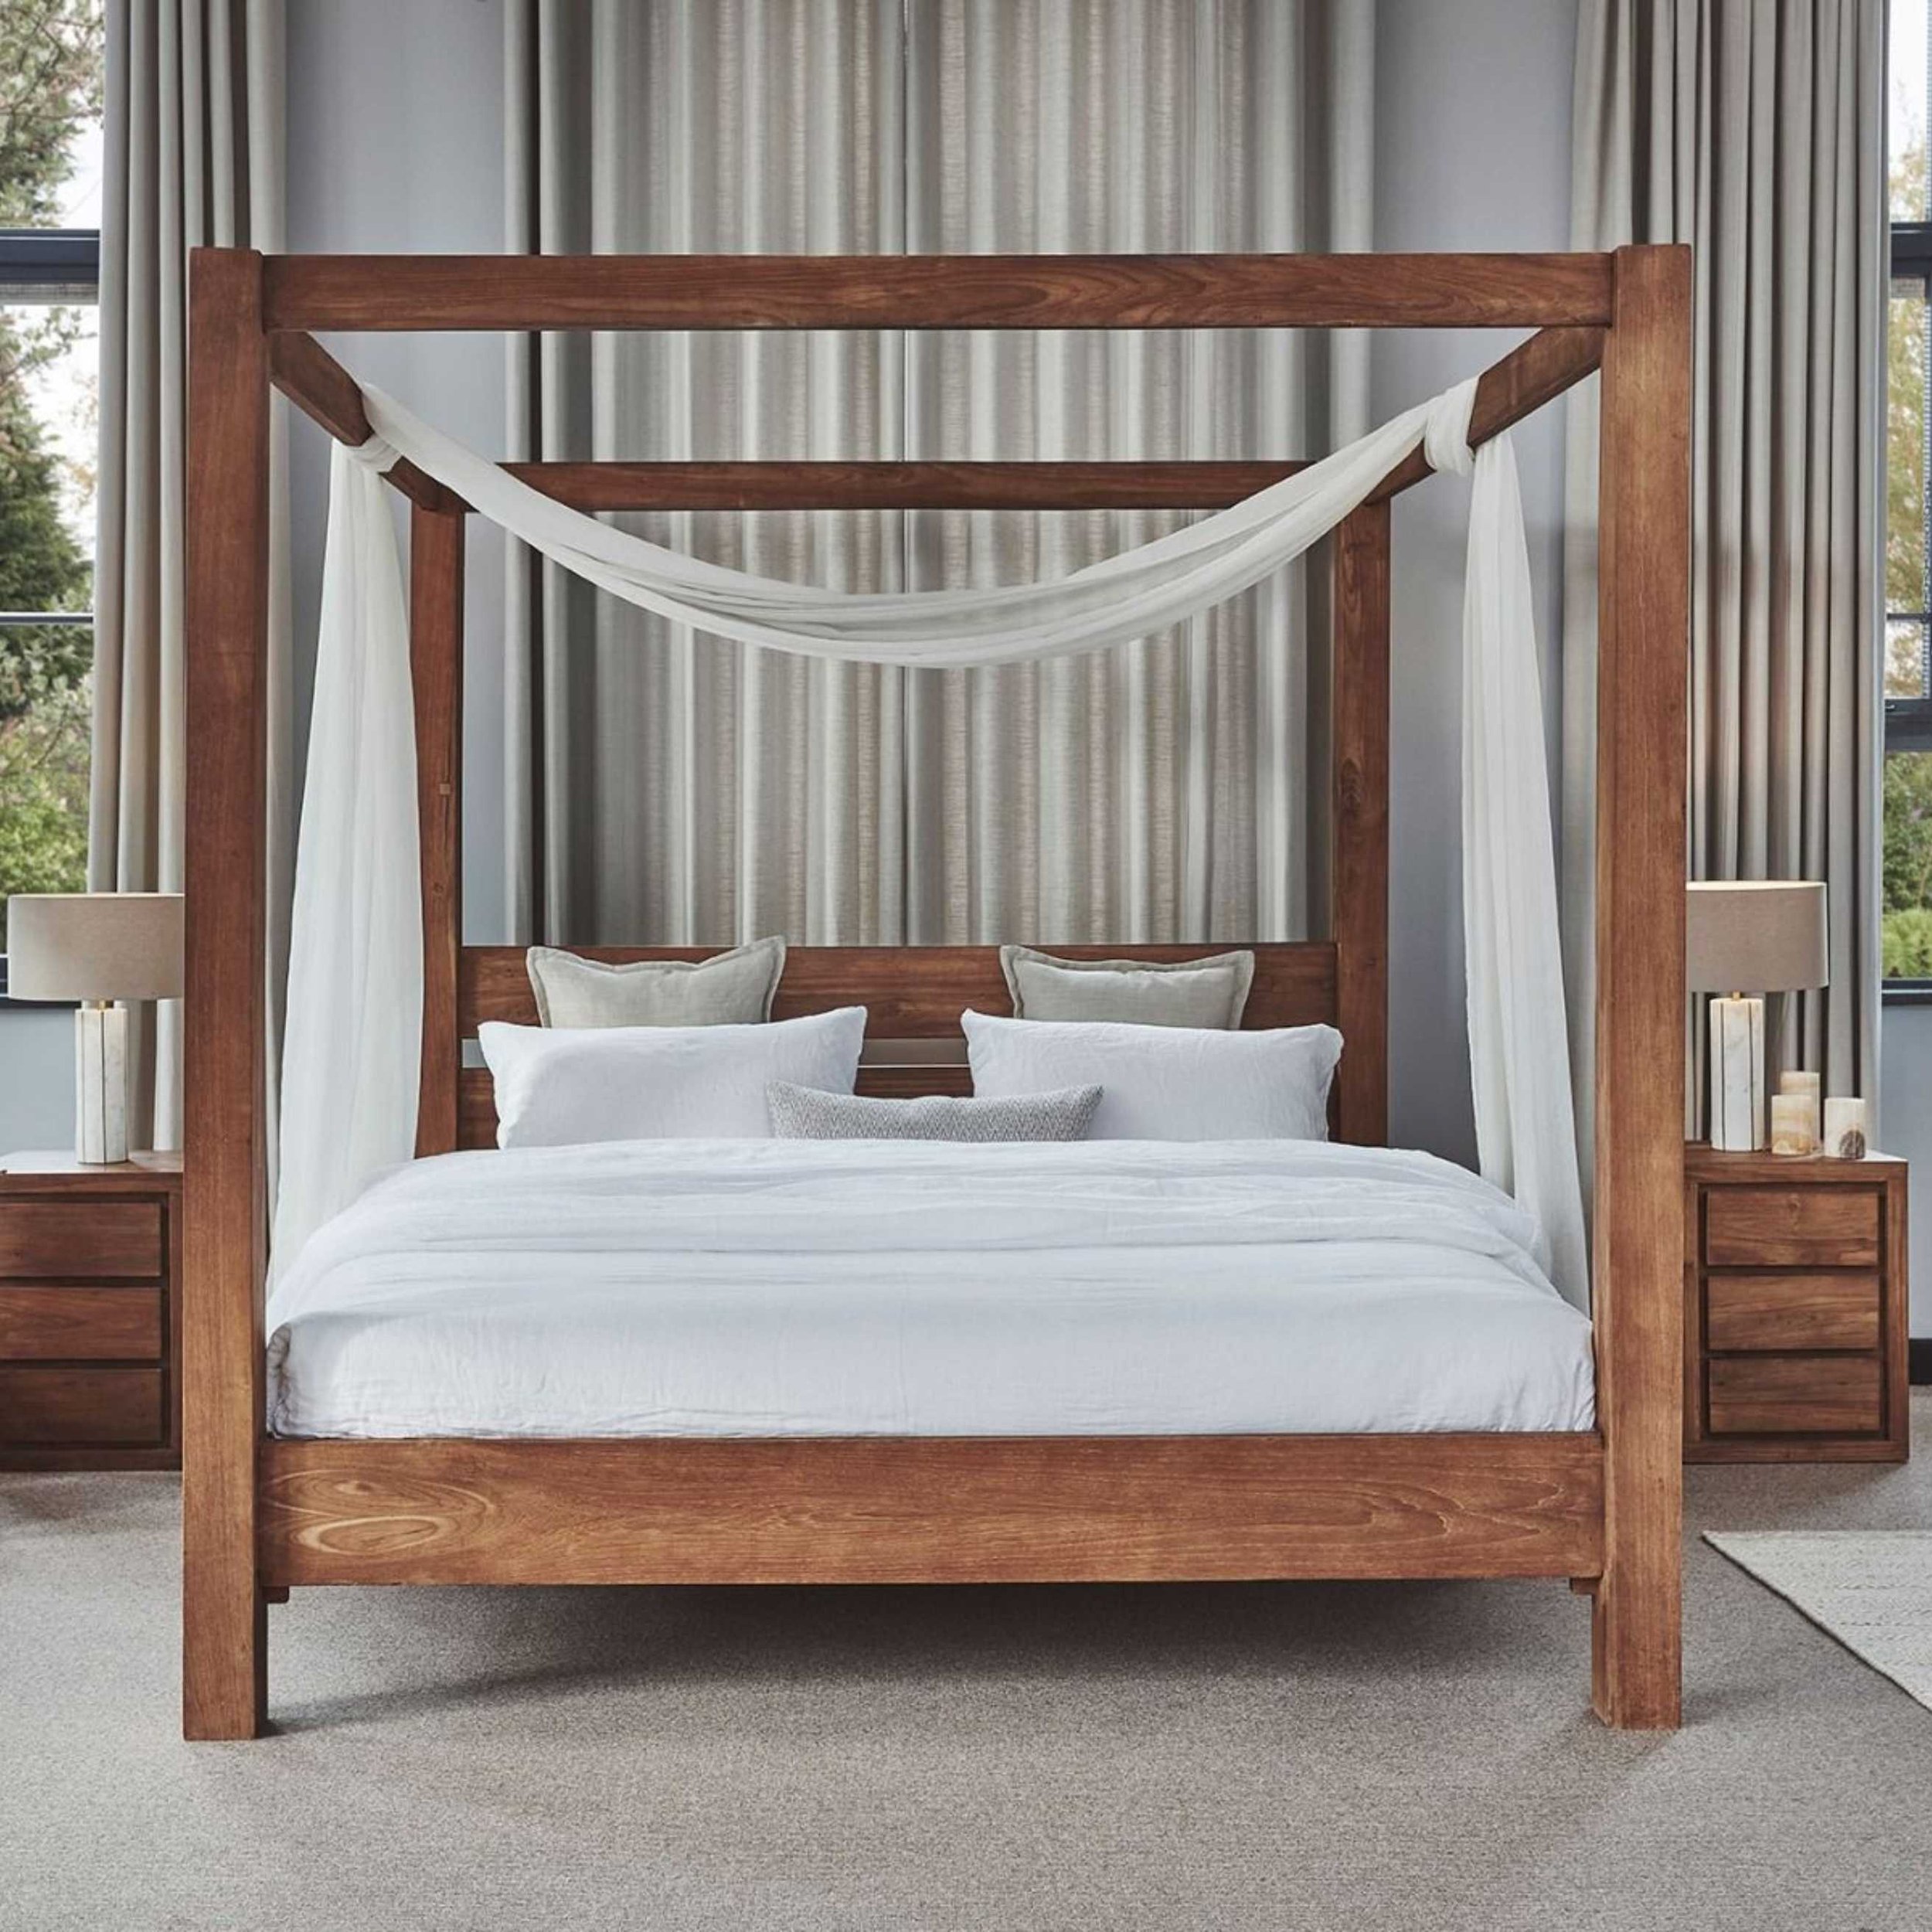 Four Poster Wood Bed.jpg